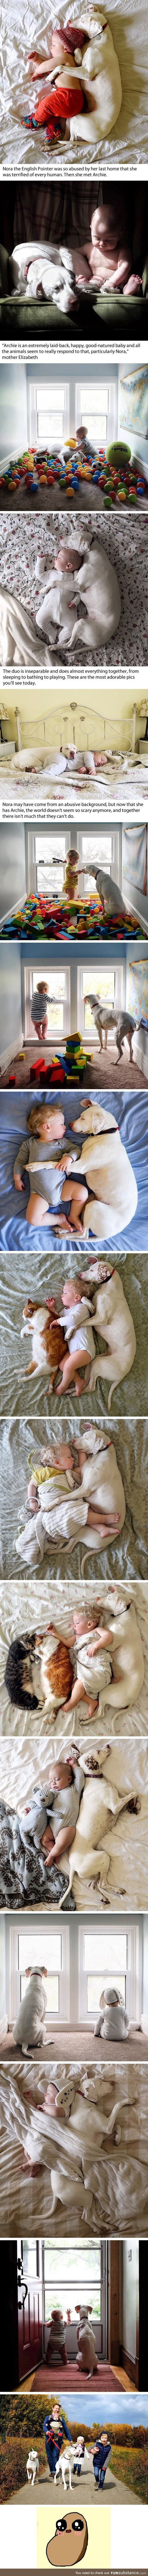 Abused dog was scared of everything until this cute baby melts its heart